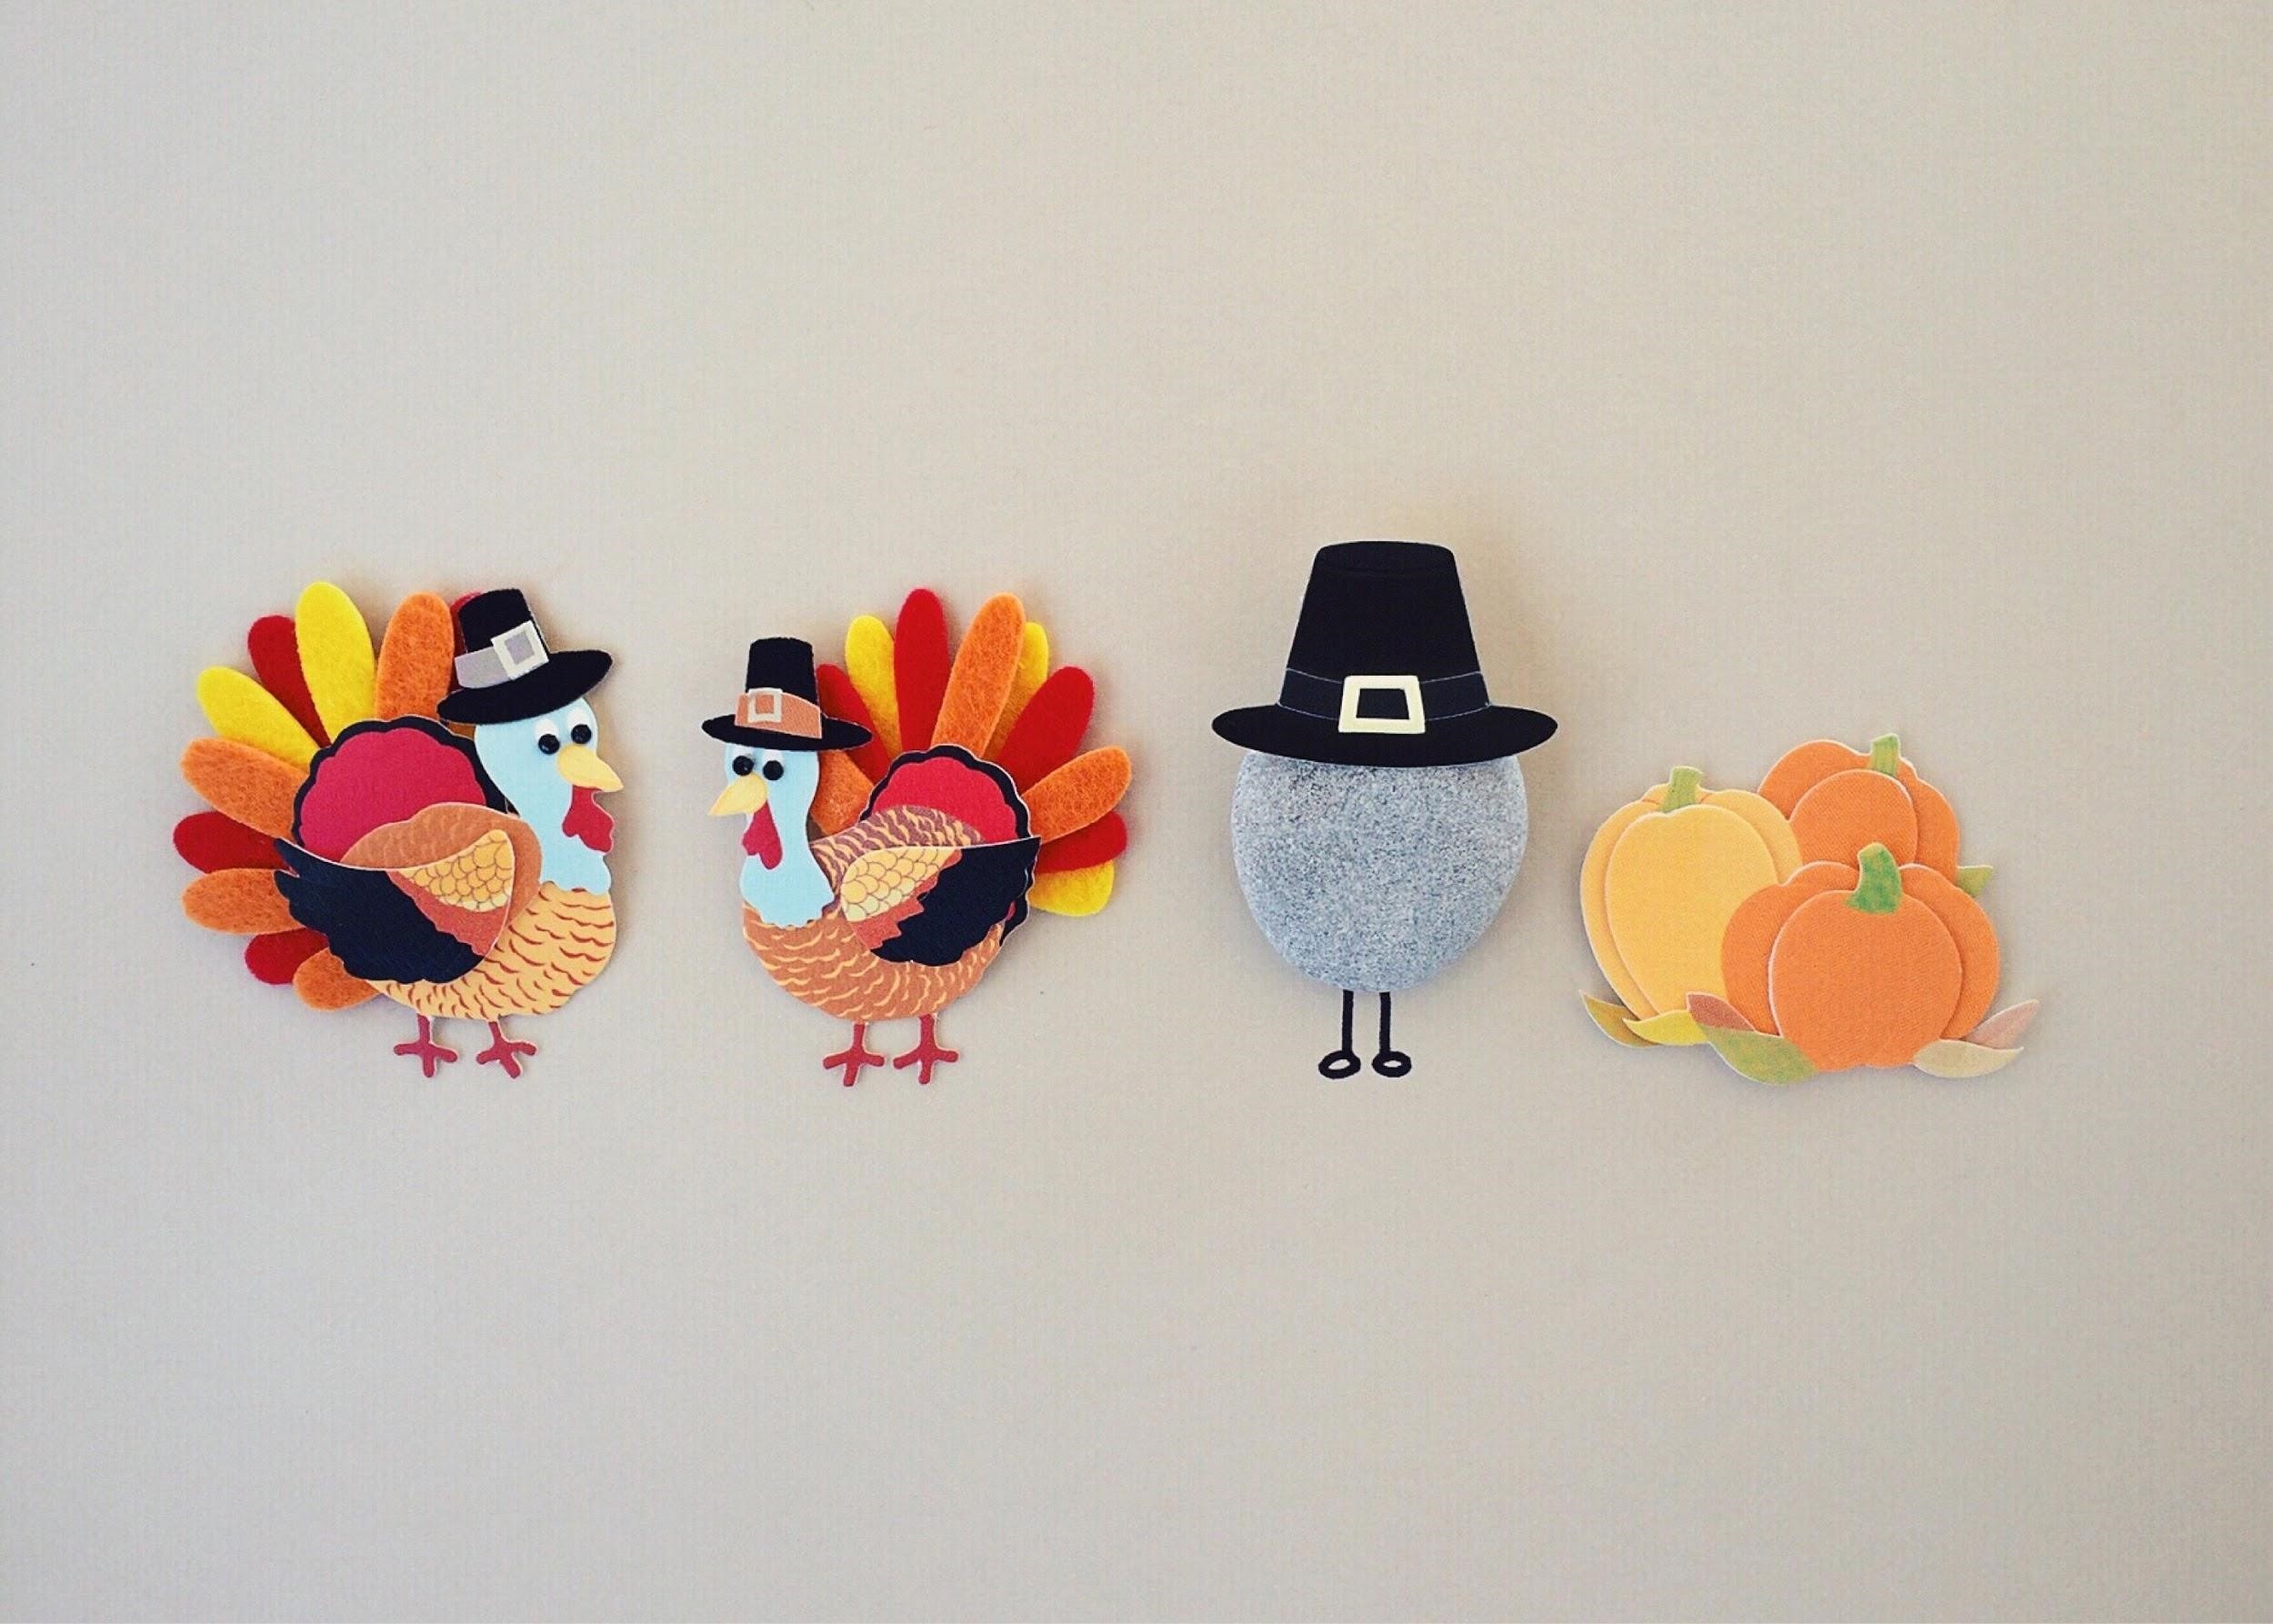 5 Amusing ICD-10 Codes for Thanksgiving